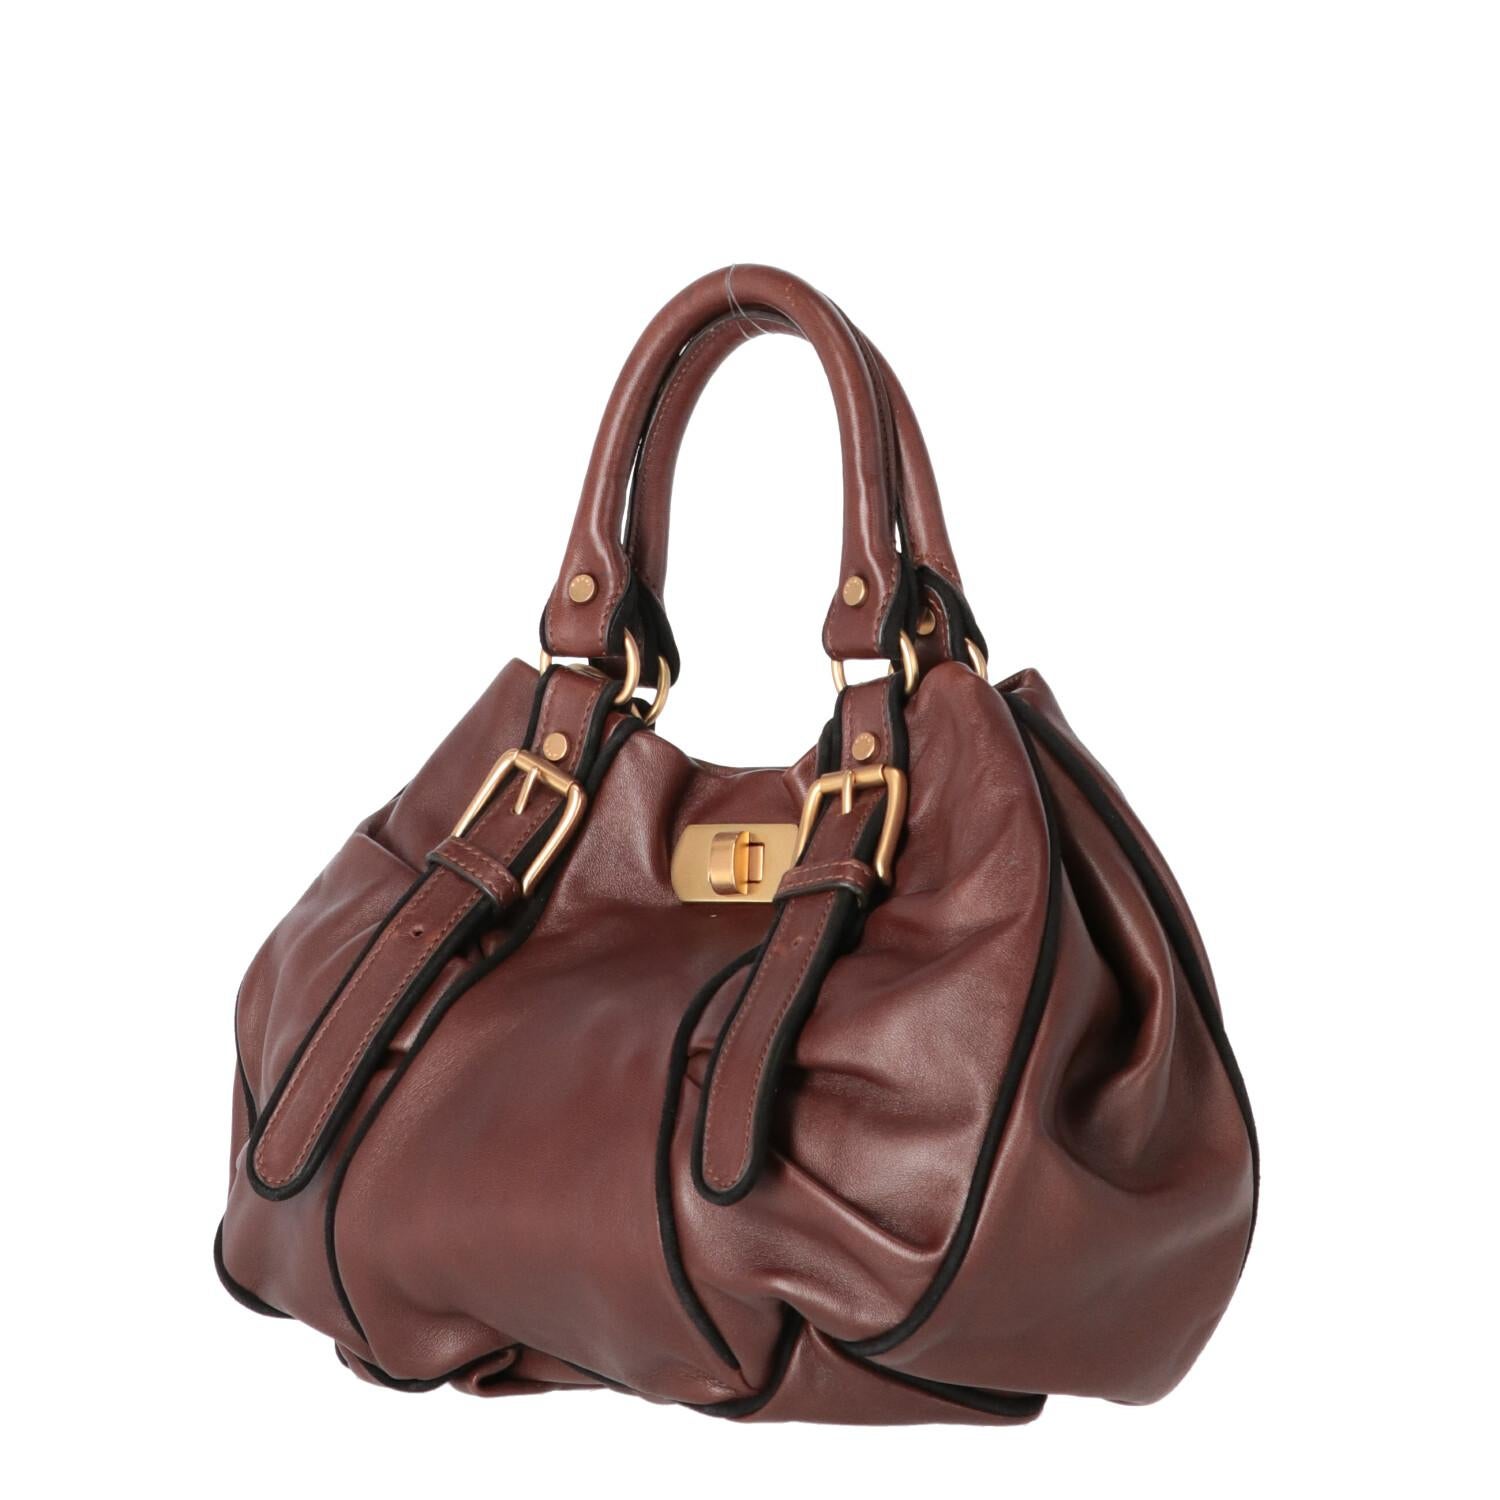 A.N.G.E.L.O. Vintage - ITALY
Marni brown leather handbag with black finished edges. Draped design, golden metal details and front hook closure.

The bag shows light signs of wear on the leather and on the metallic parts as shown in the